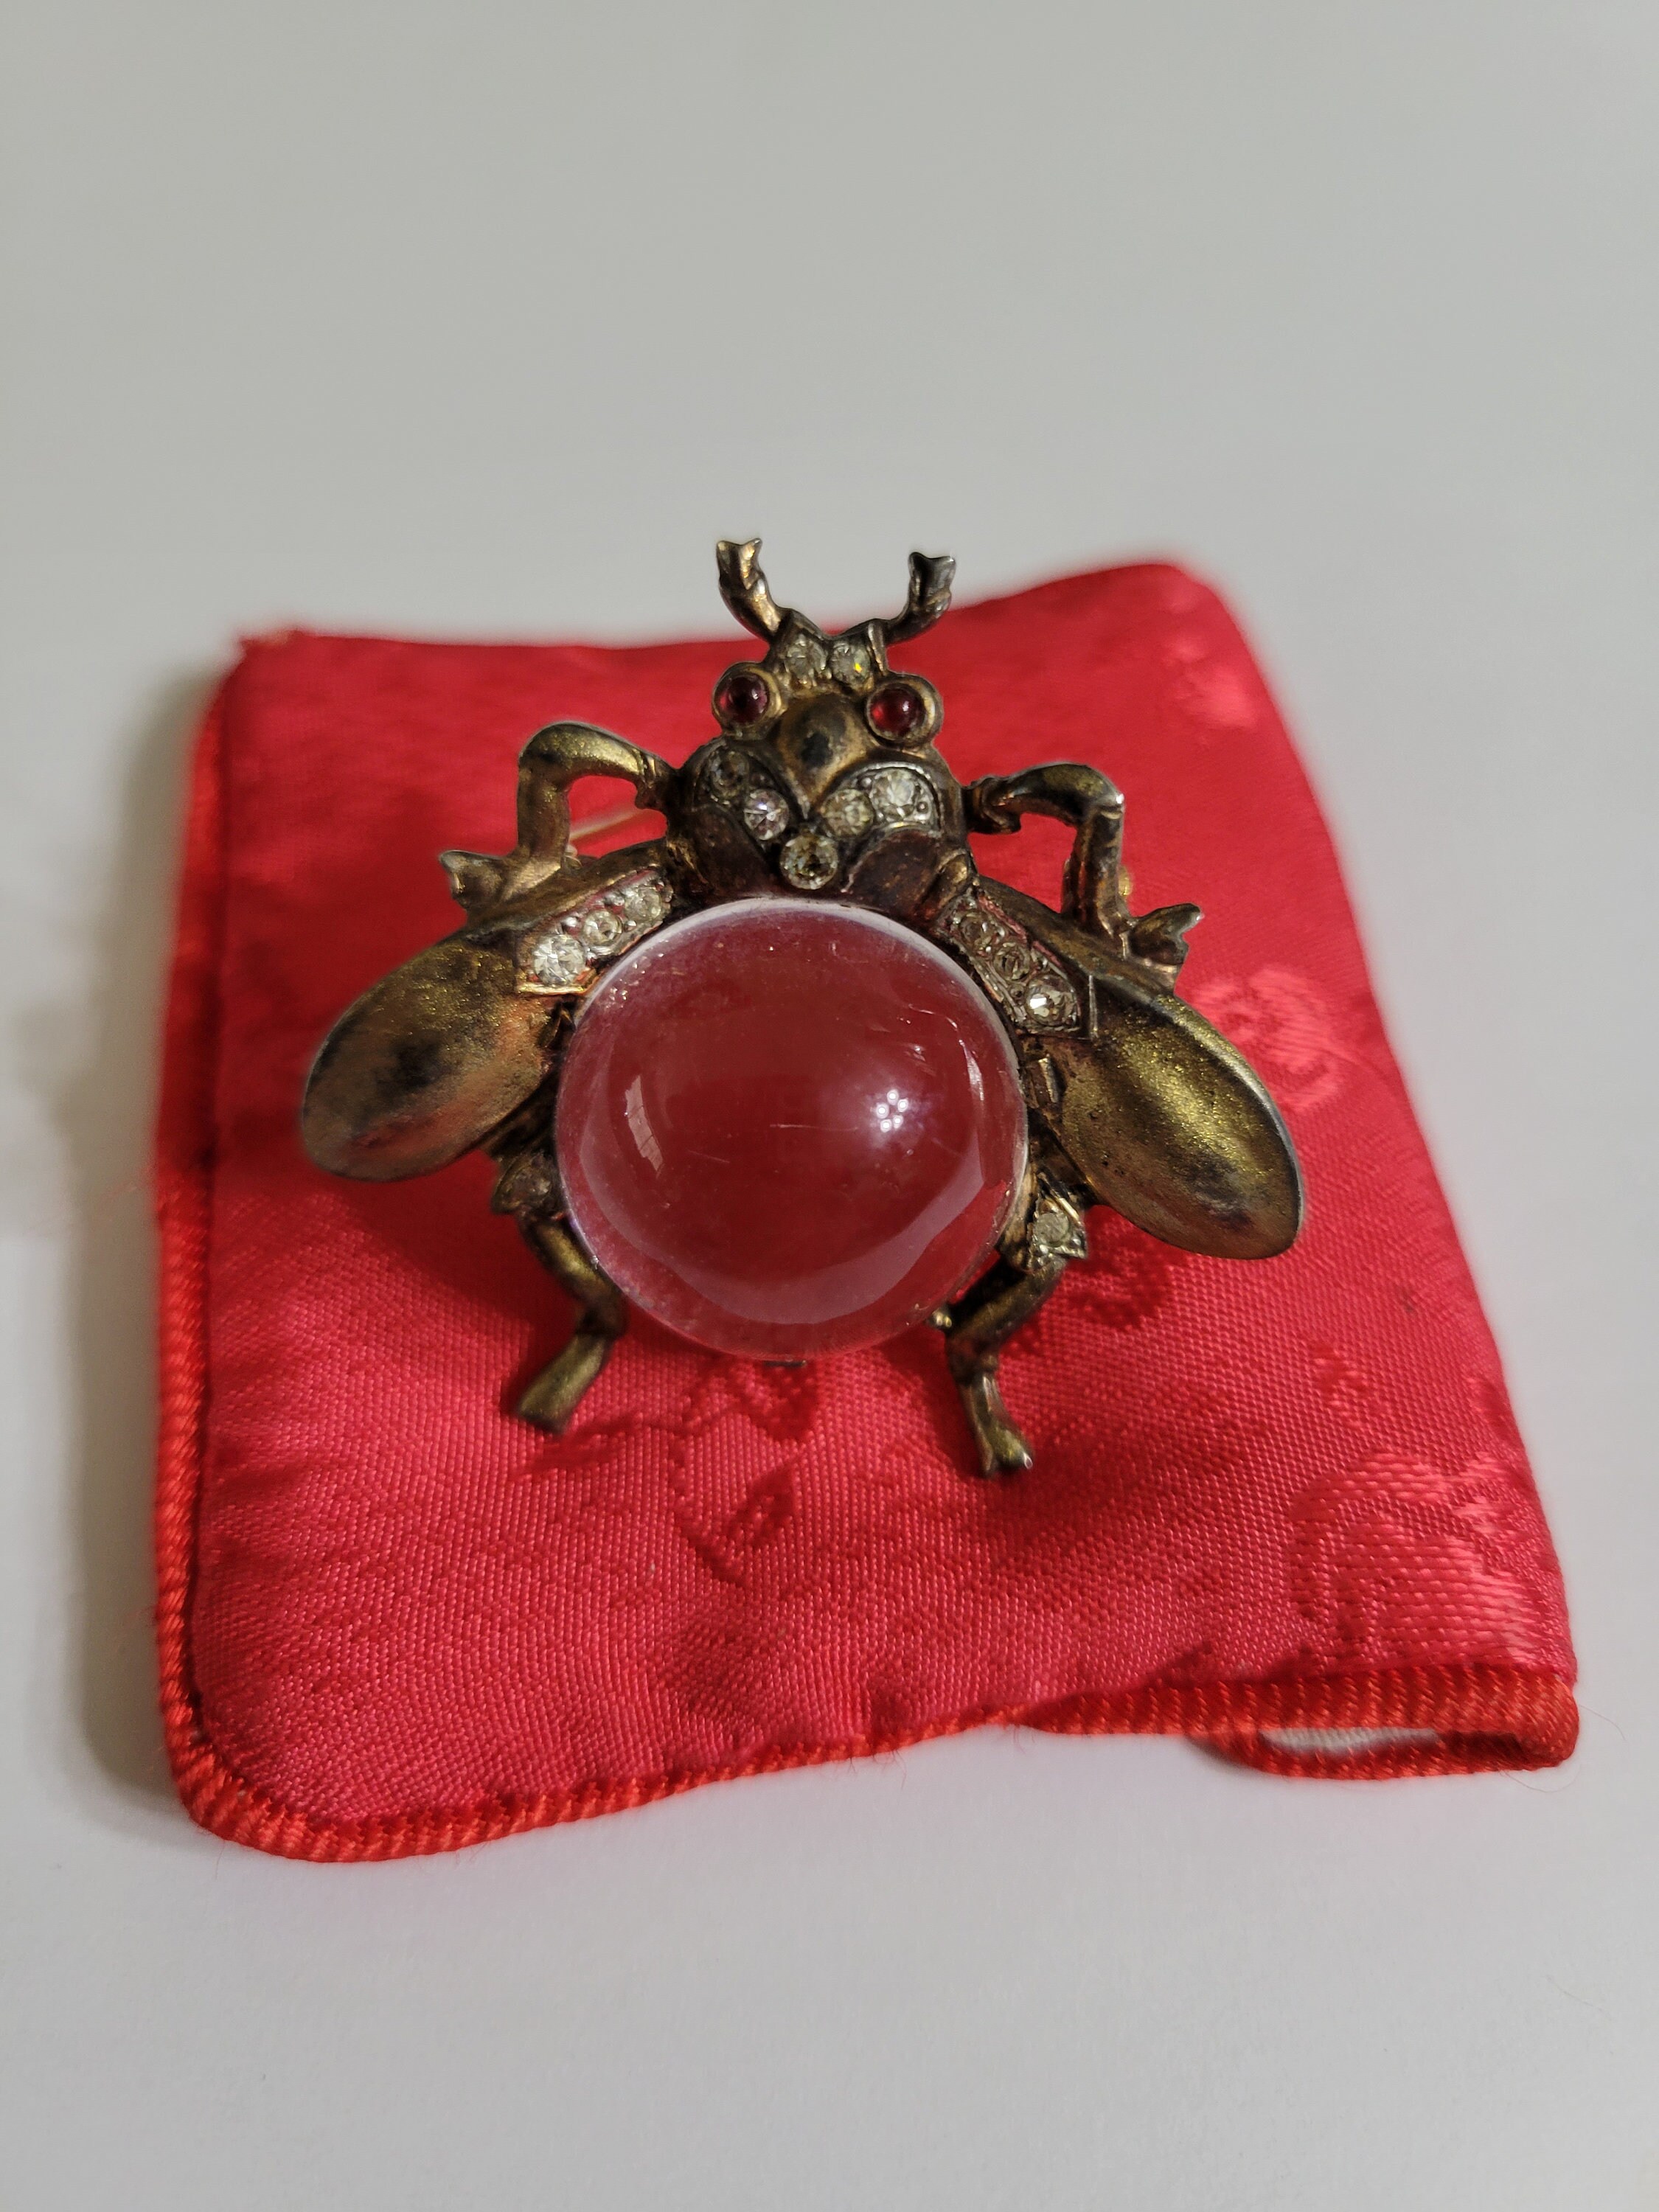 DSF Antique Jewelry Trifari 1940’s Alfred Philippe Sterling Silver Jelly Belly Spider Brooch